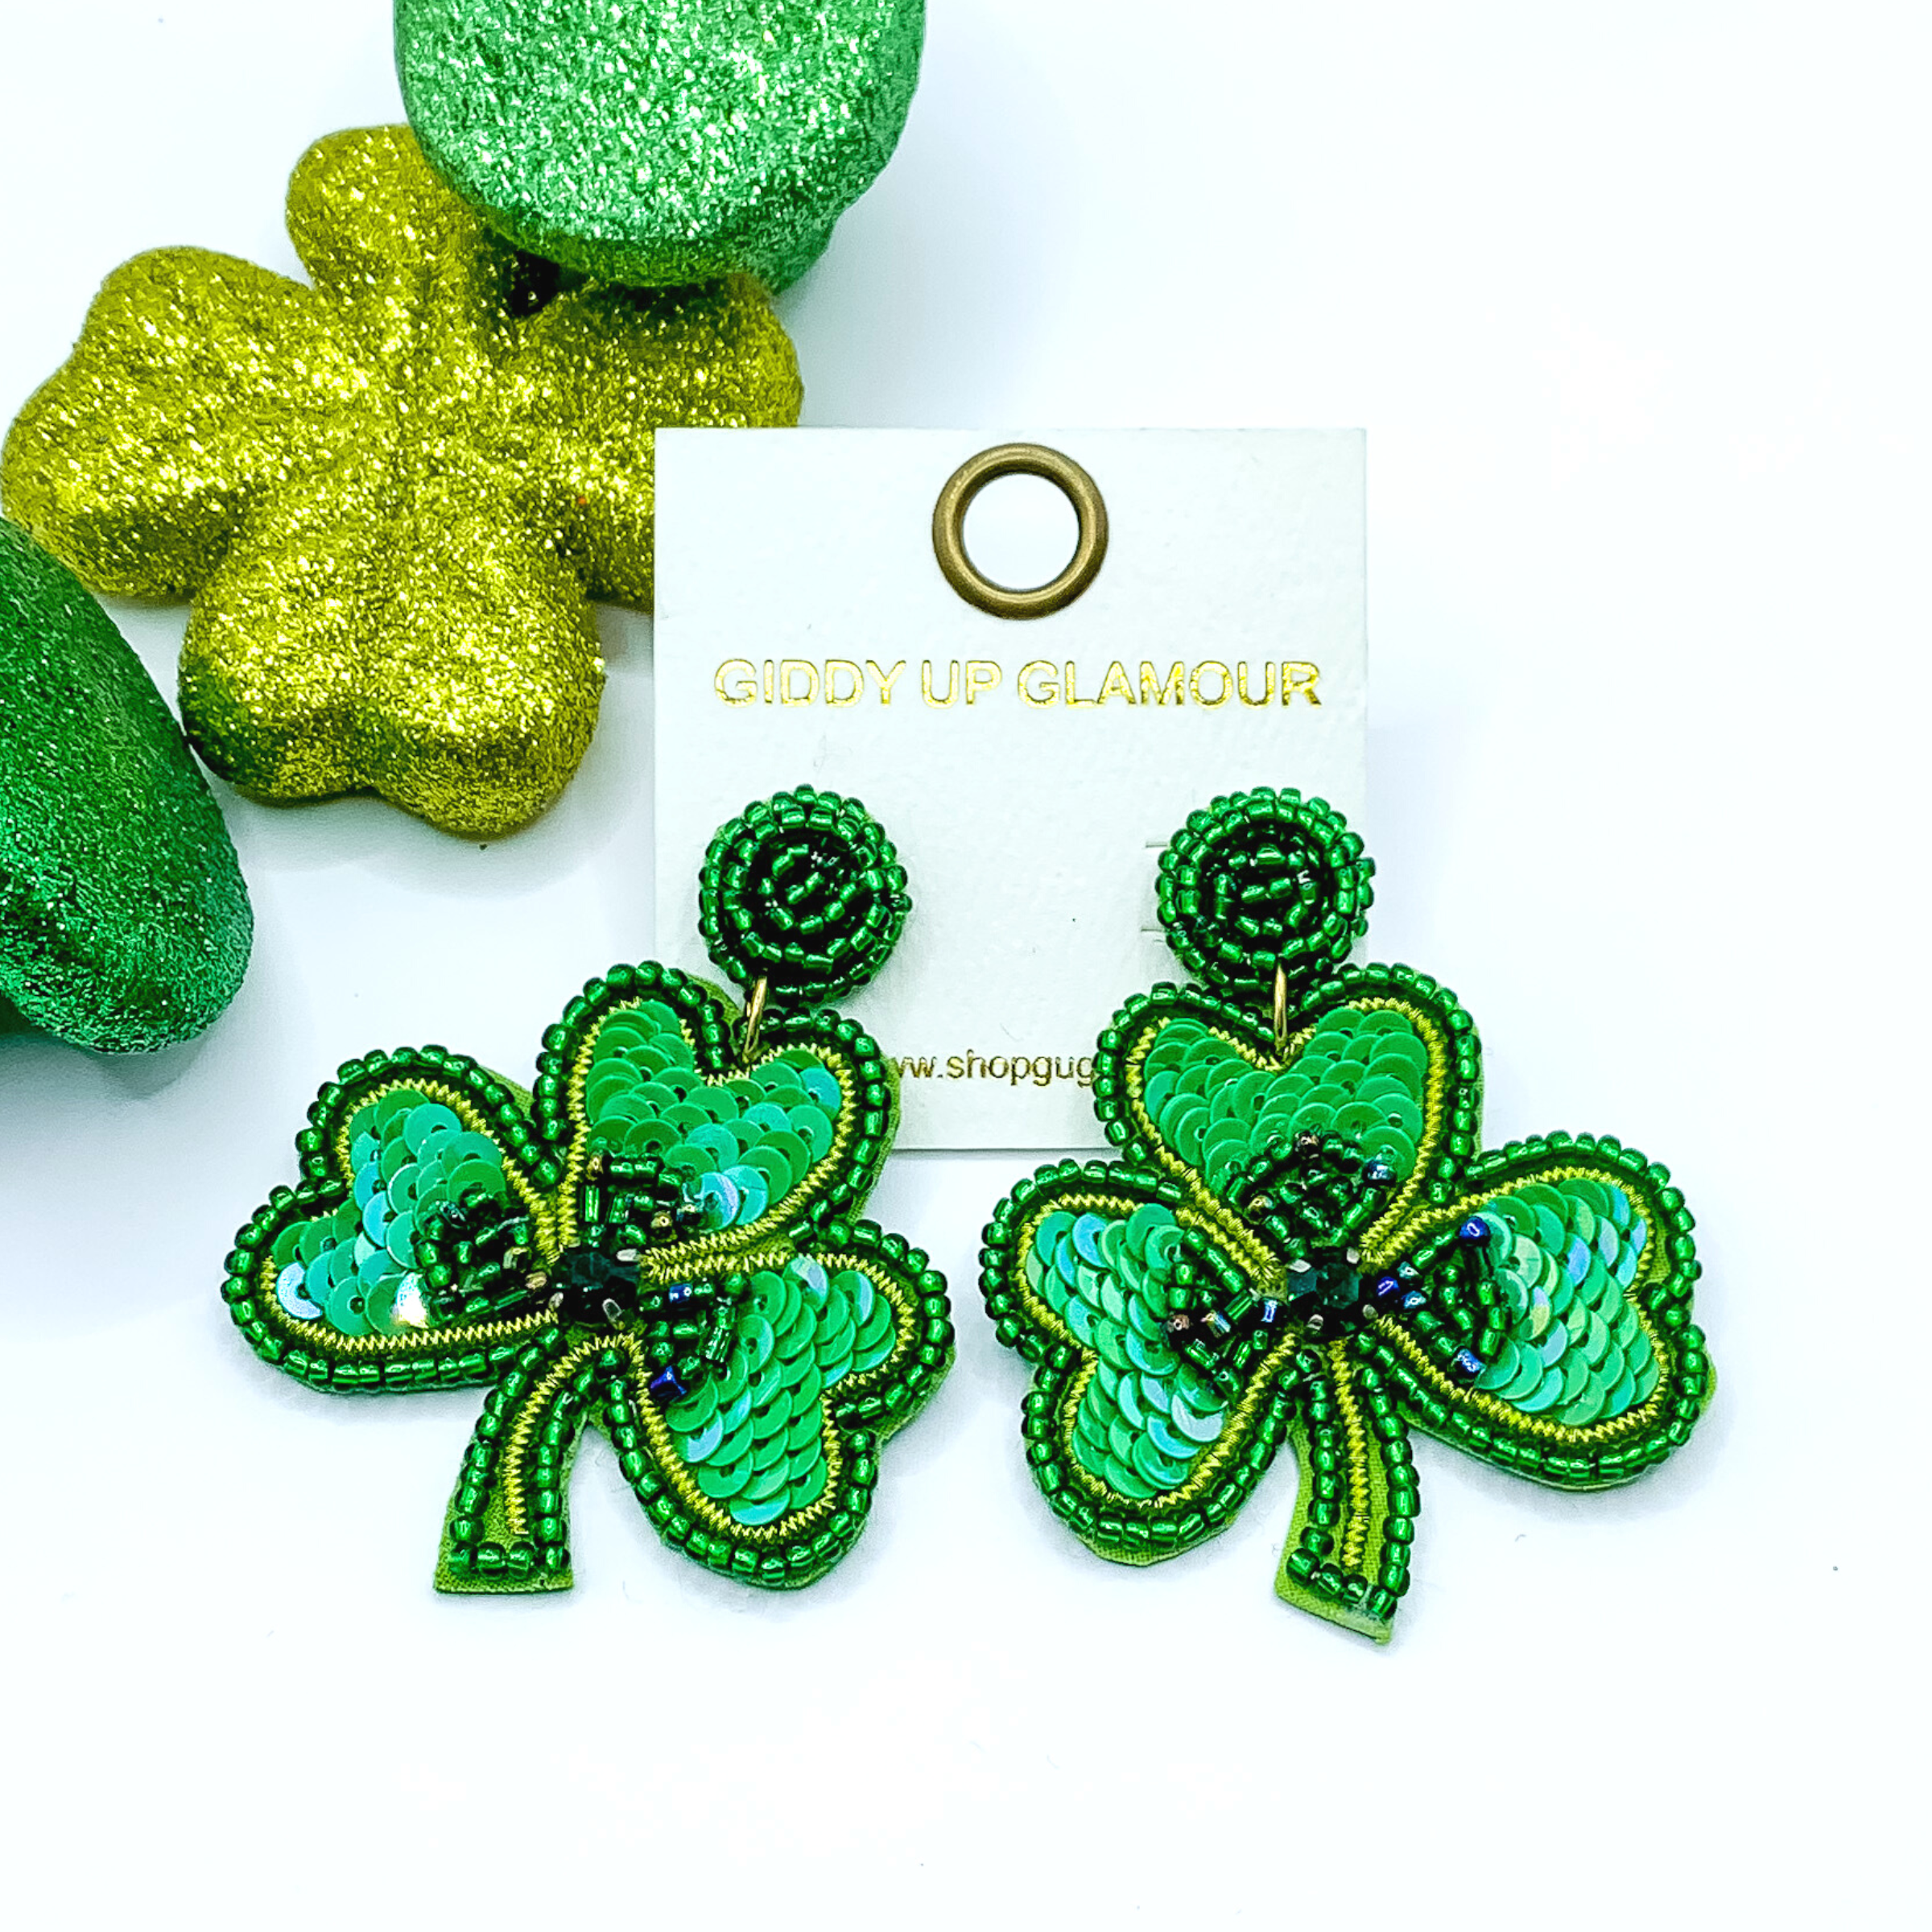 Green beaded shamrock earrings with green sequins. These earrings are pictured on a white background with green decor in the top left corner. 